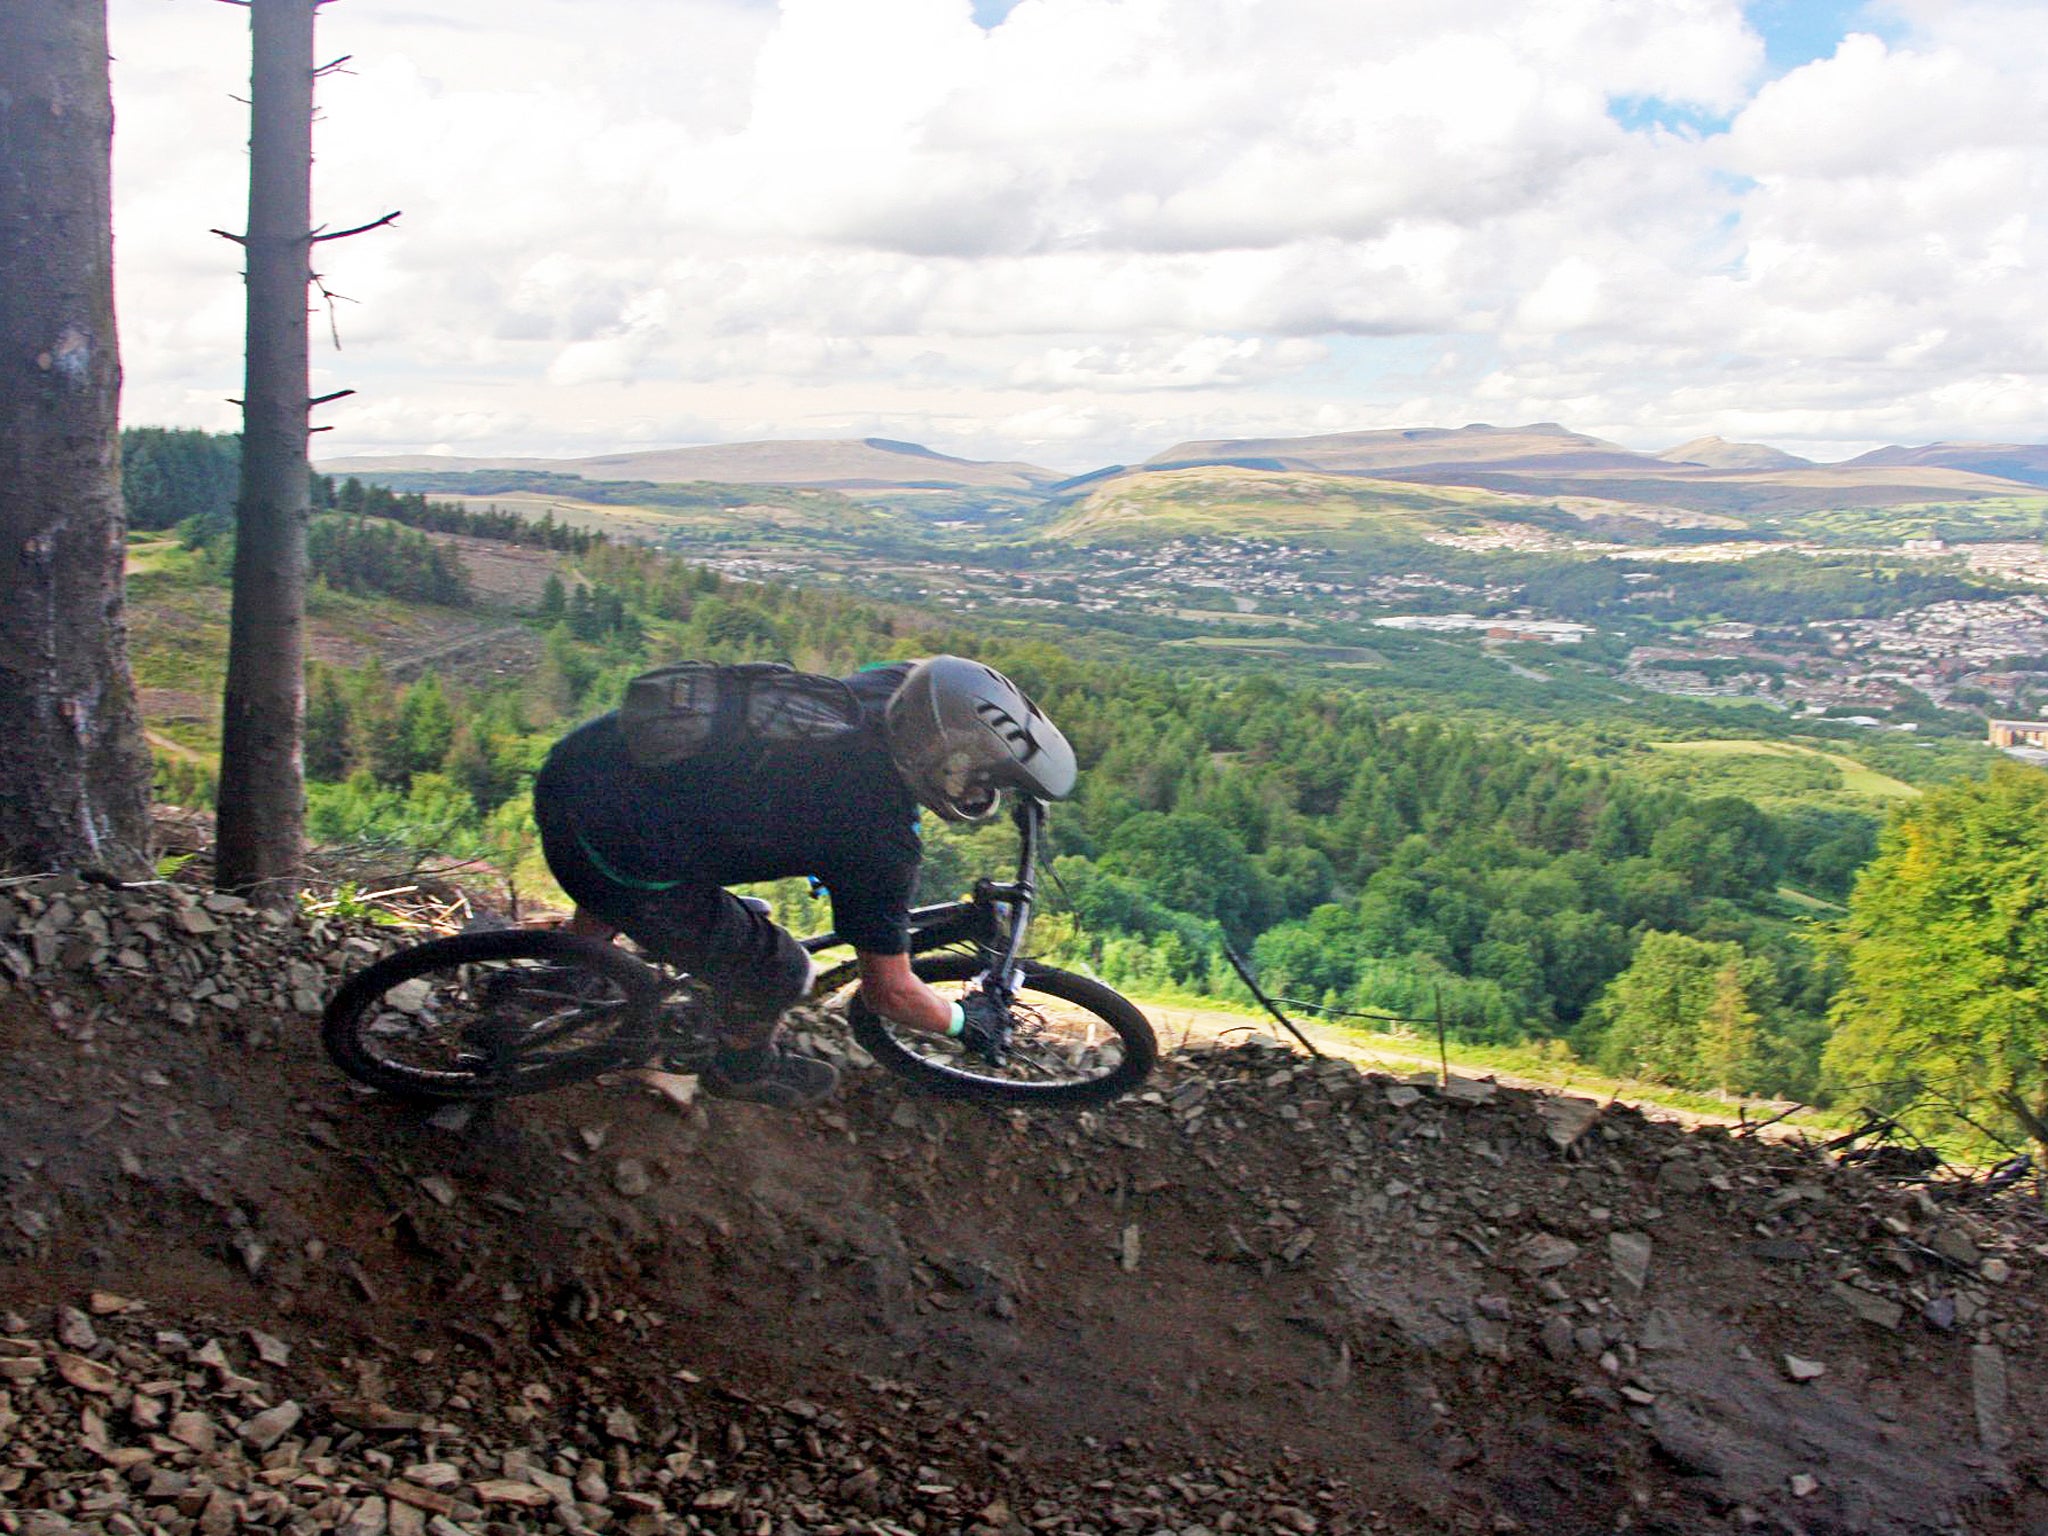 Wild Wales: Christopher Wakling hits the heights above Merthyr Tydfil